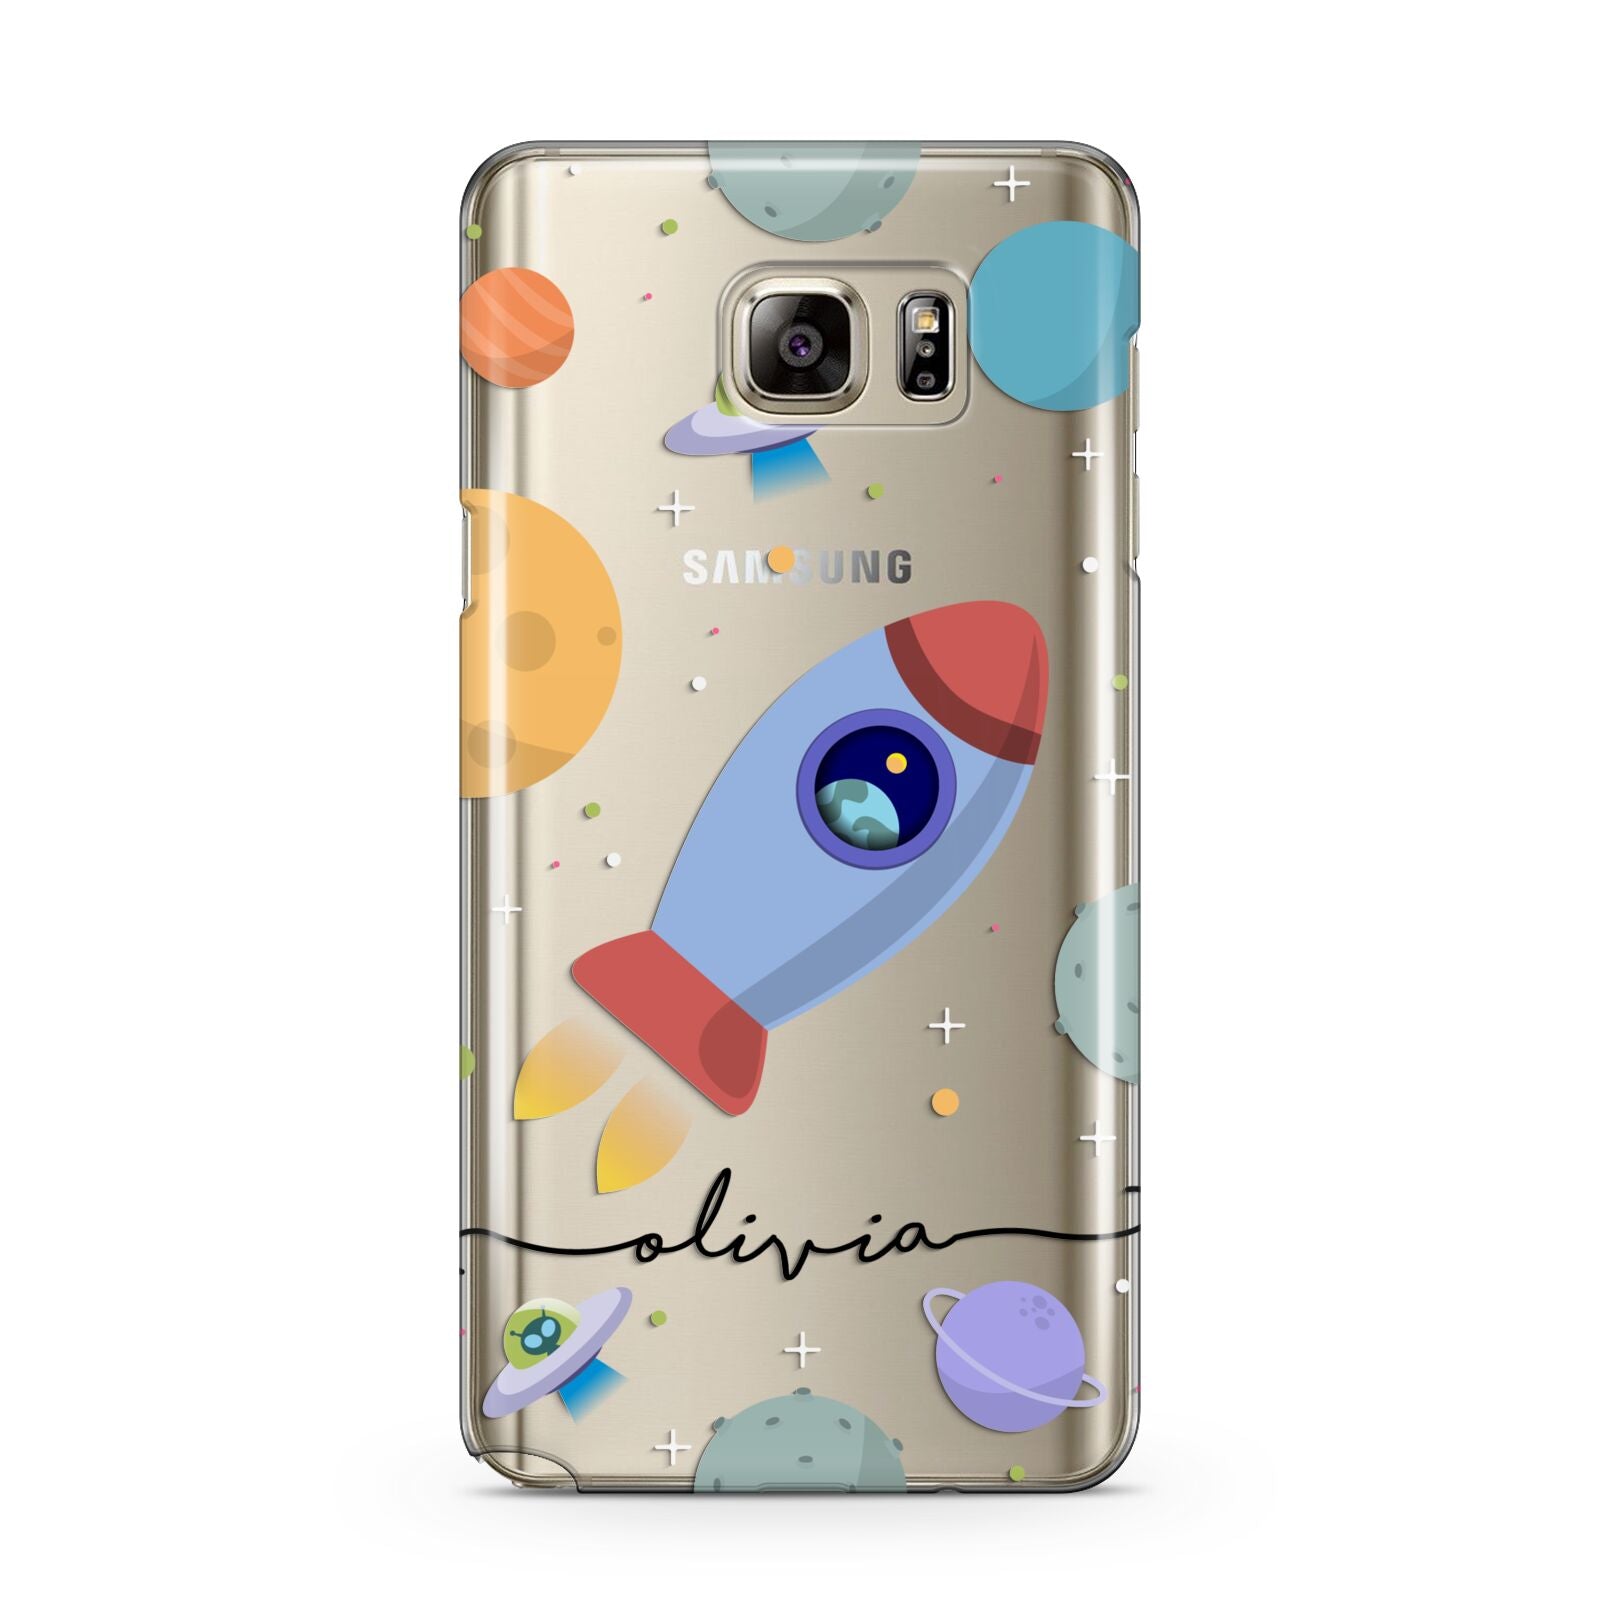 Cartoon Space Artwork with Name Samsung Galaxy Note 5 Case